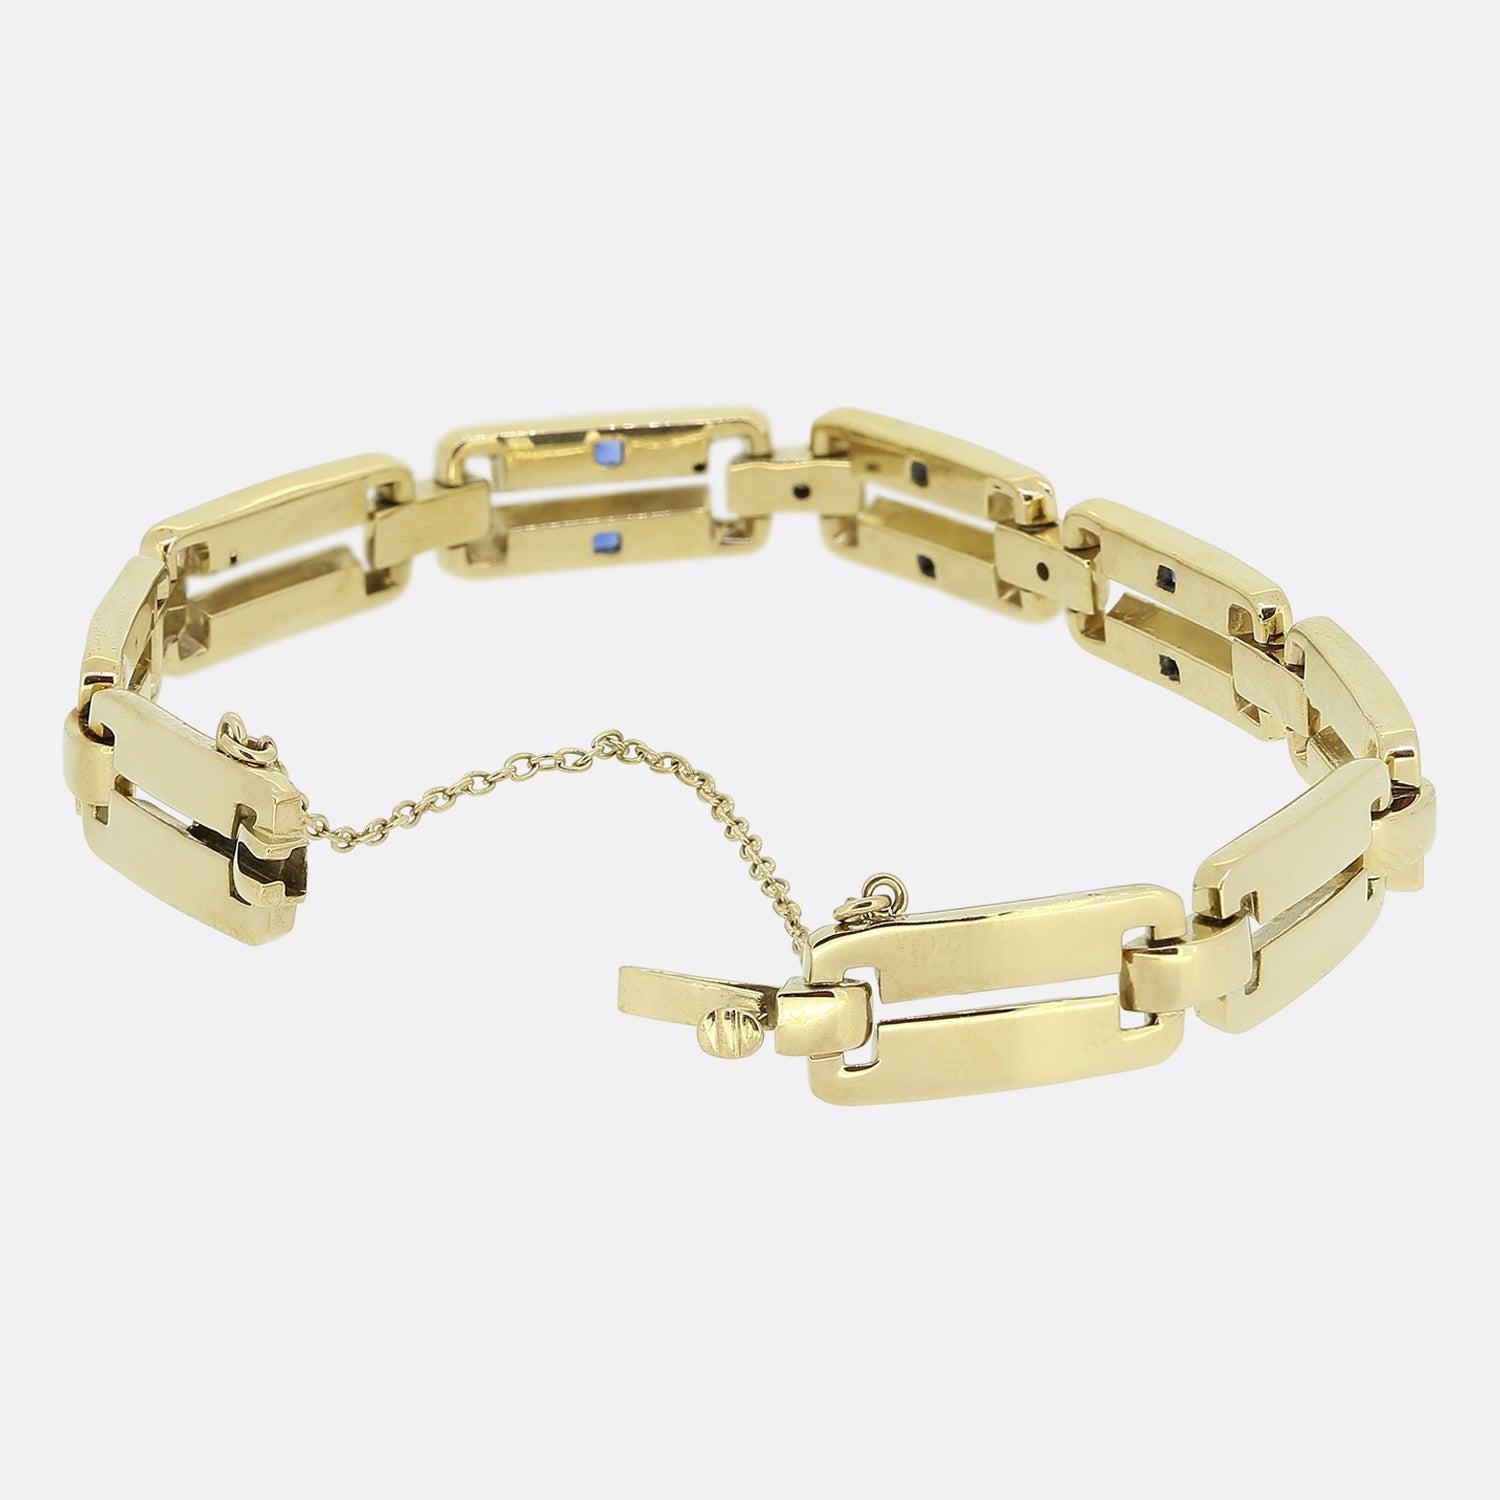 Here we have a versatile vintage bracelet. It consists of sleek 14ct gold rectangular open links, the front three of which have each been adorned with a duo of rub-over set square sapphires and connected by old cut diamond set circular prism shaped